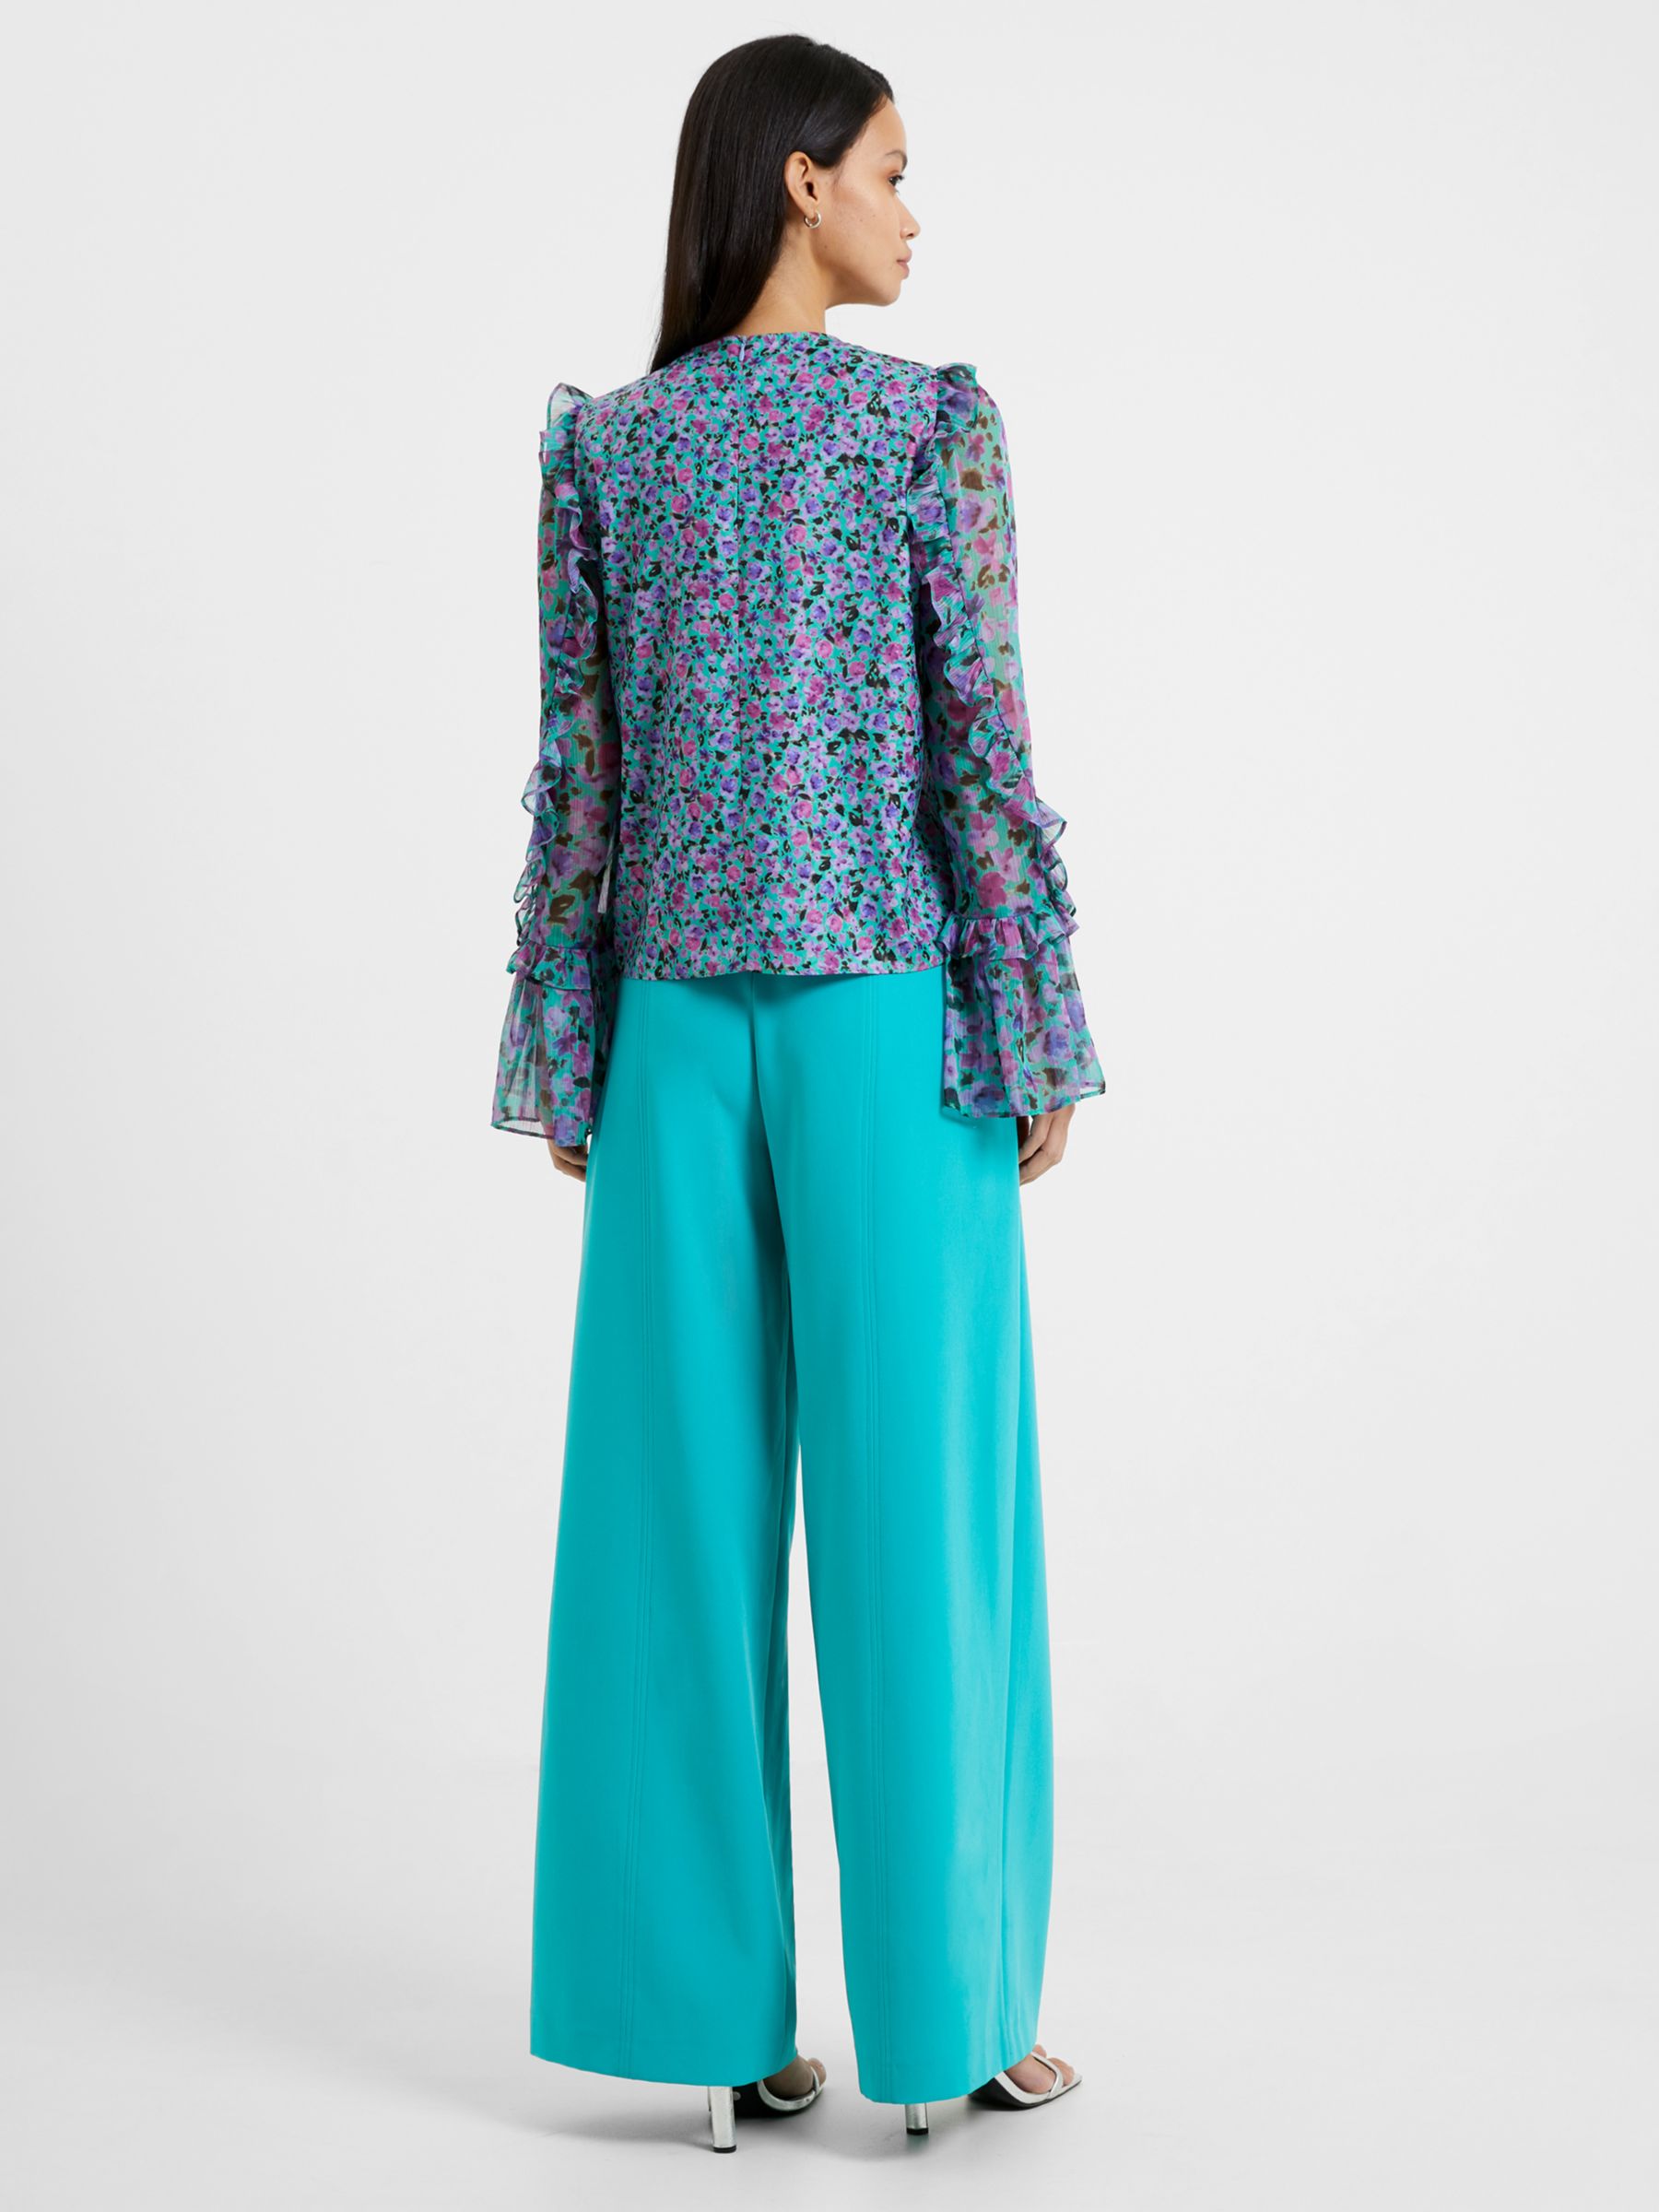 Buy French Connection Alezzia Floral Print Top Online at johnlewis.com